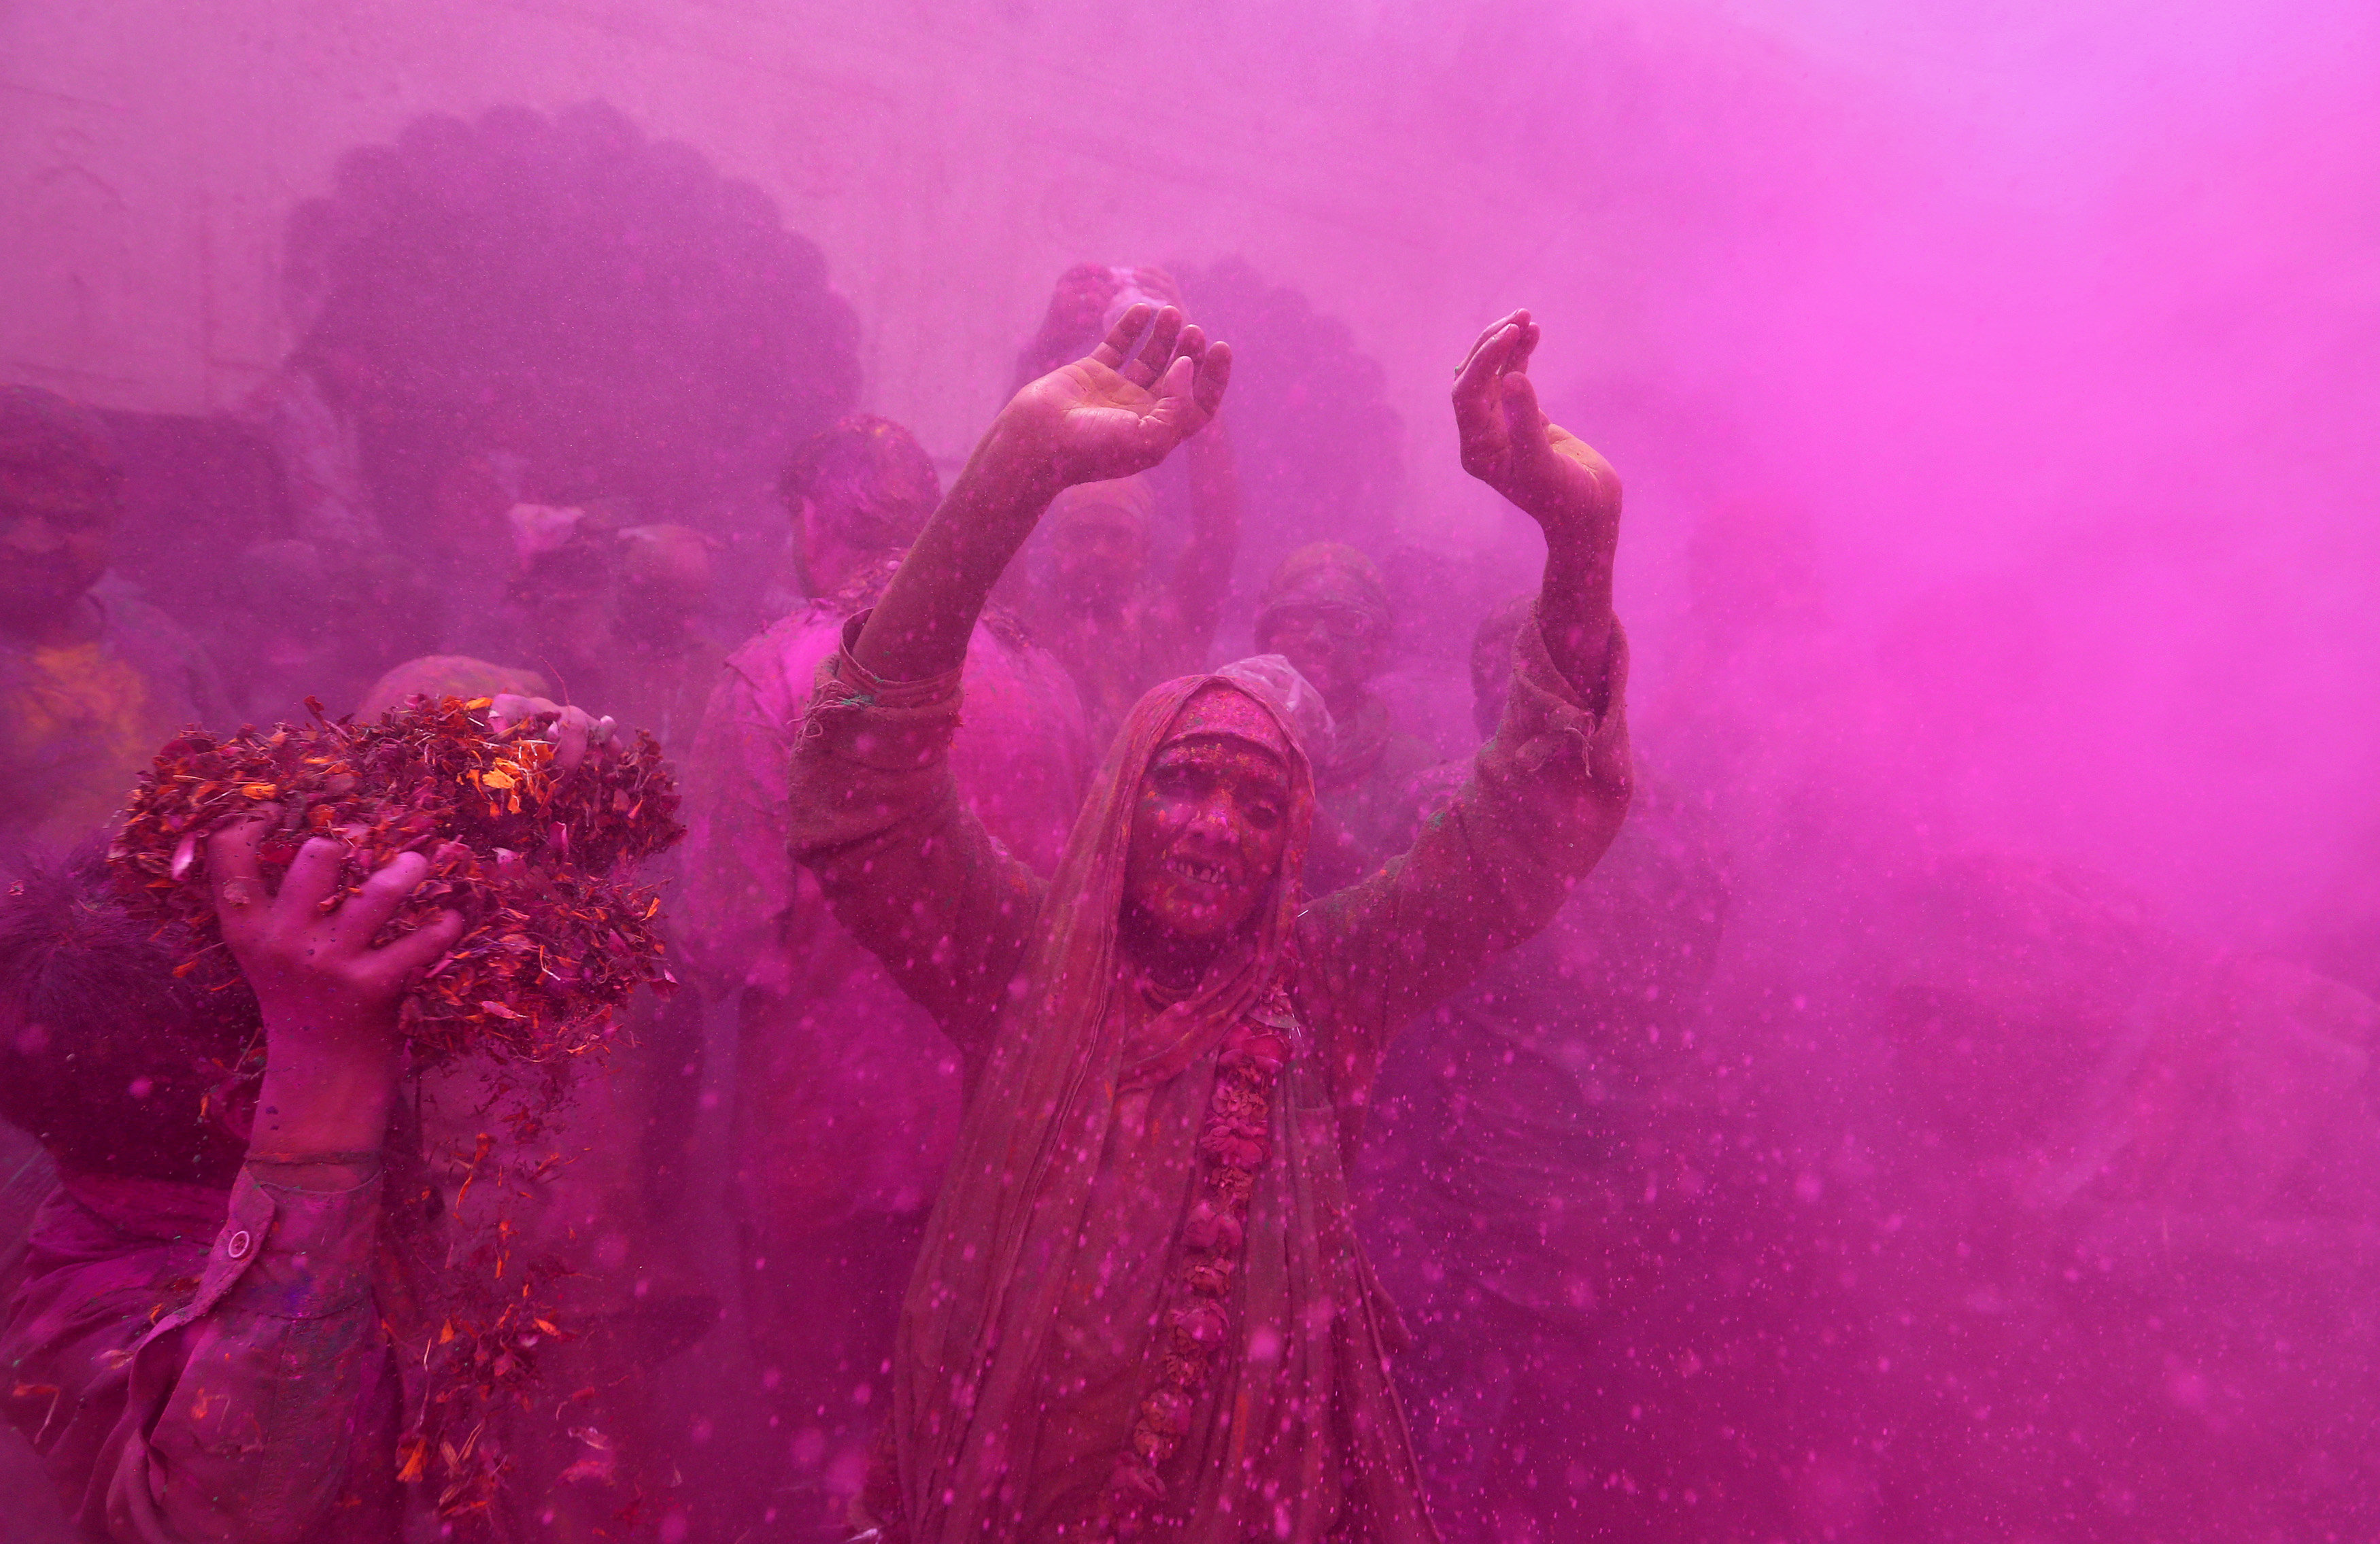 Widows take part in Holi celebrations in the town of Vrindavan in the northern state of Uttar Pradesh, India PHOTO: REUTERS